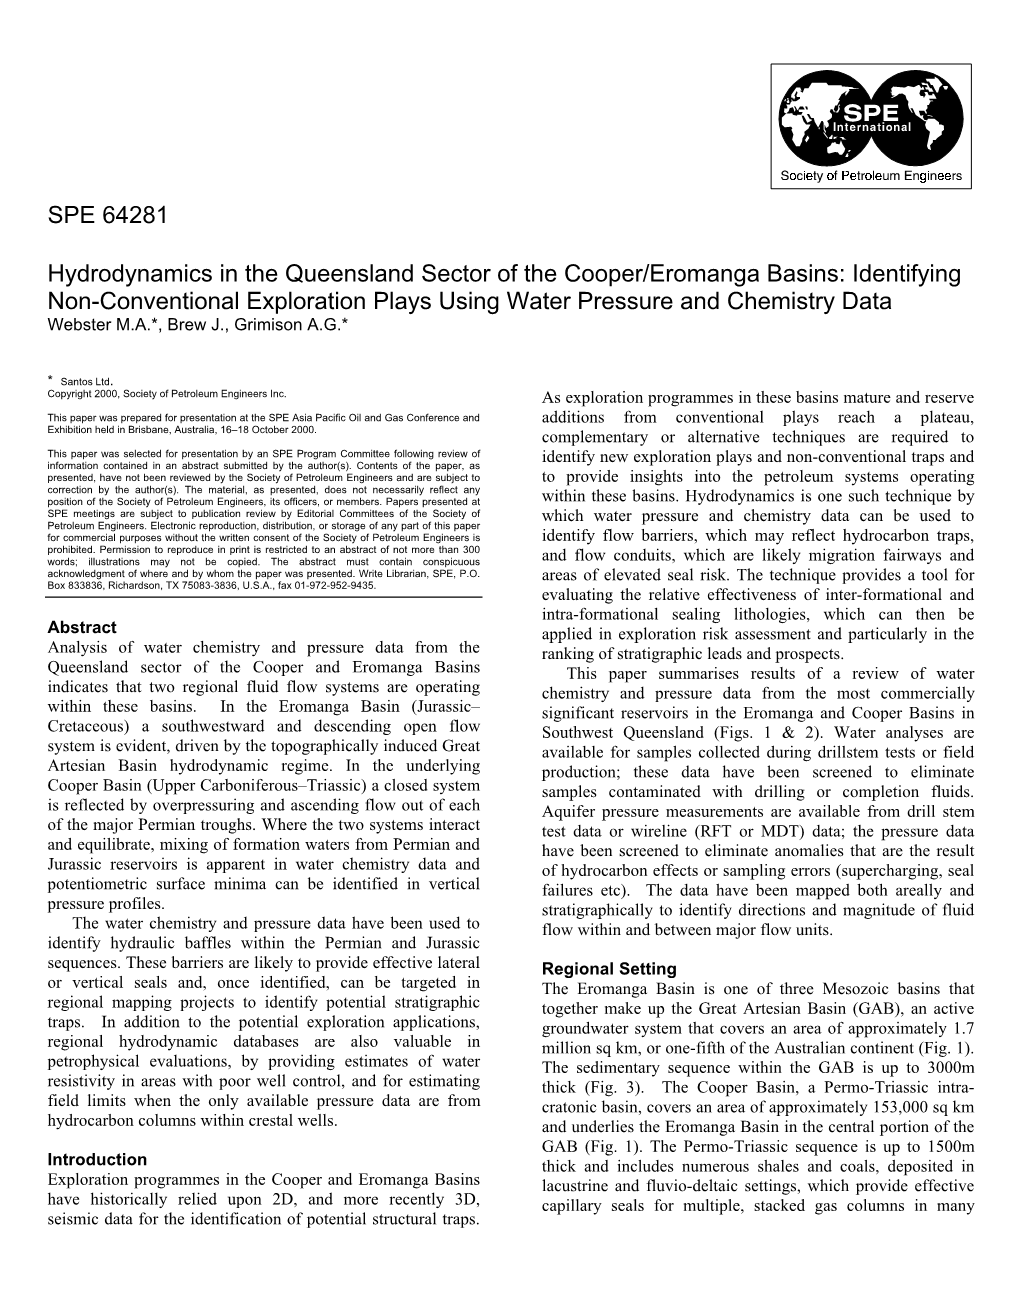 Hydrodynamics in the Queensland Sector of The